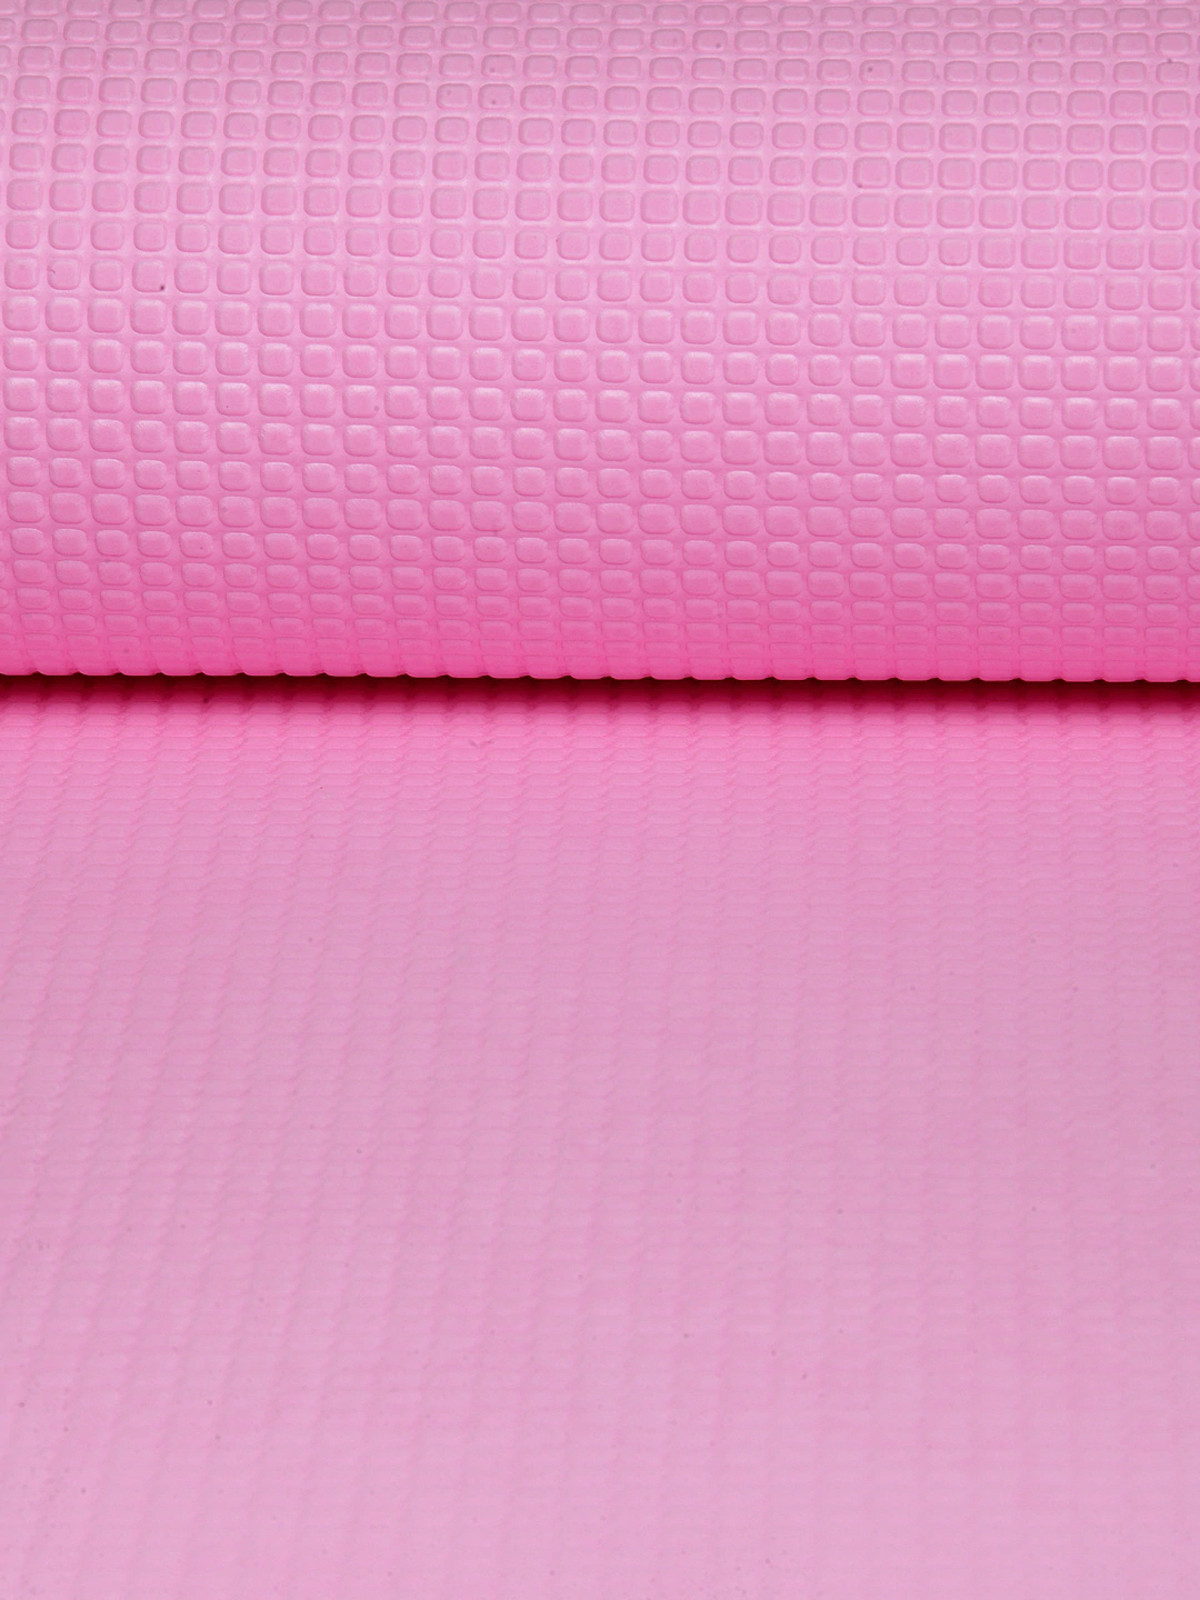 Kuber Industries 4 MM Extra Thick Yoga mat for Gym Workout and Flooring Exercise Long Size Yoga Mat for Men and Women, 6 x 2 Feet (Pink)-33_S_KUBQMART11576